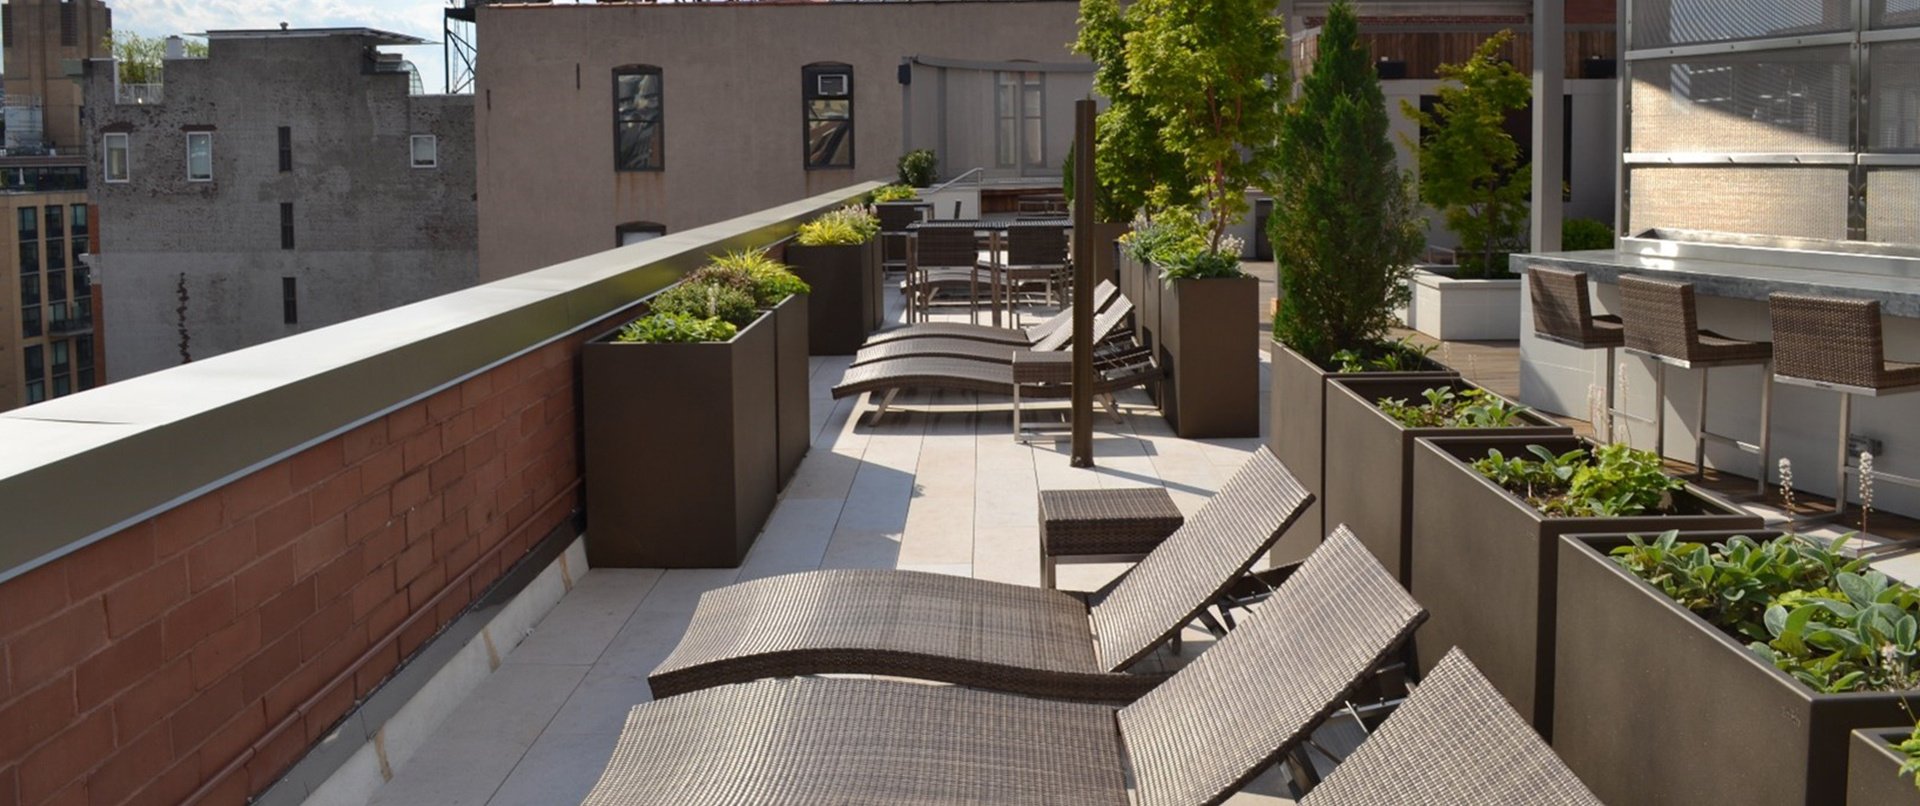 Apartment rooftop deck featured image